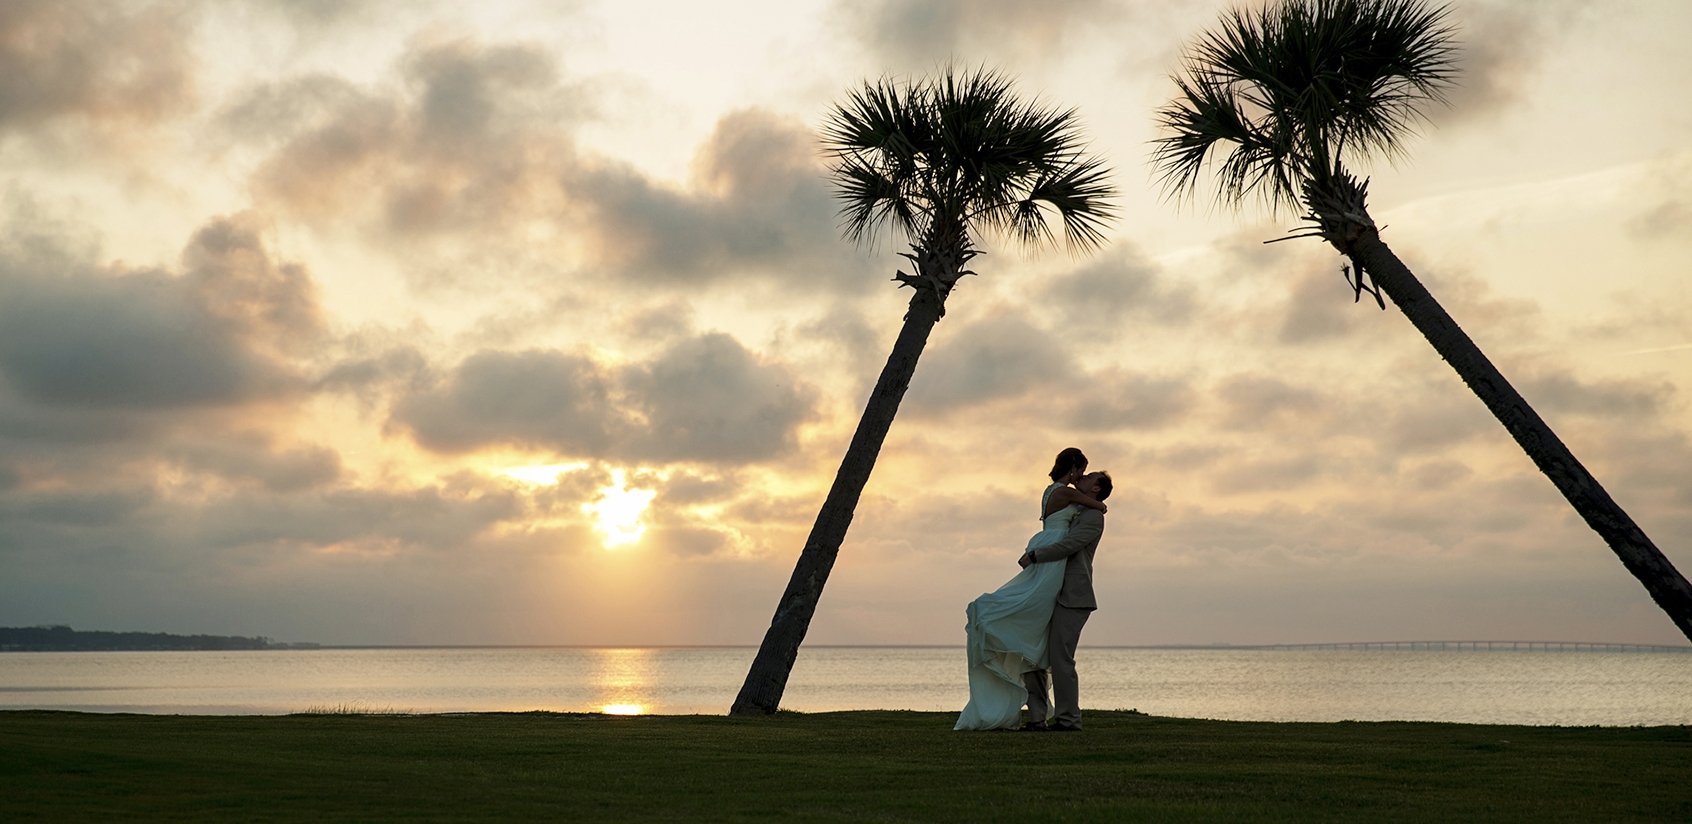 A newly wed couple kissing on the beach with palm trees 